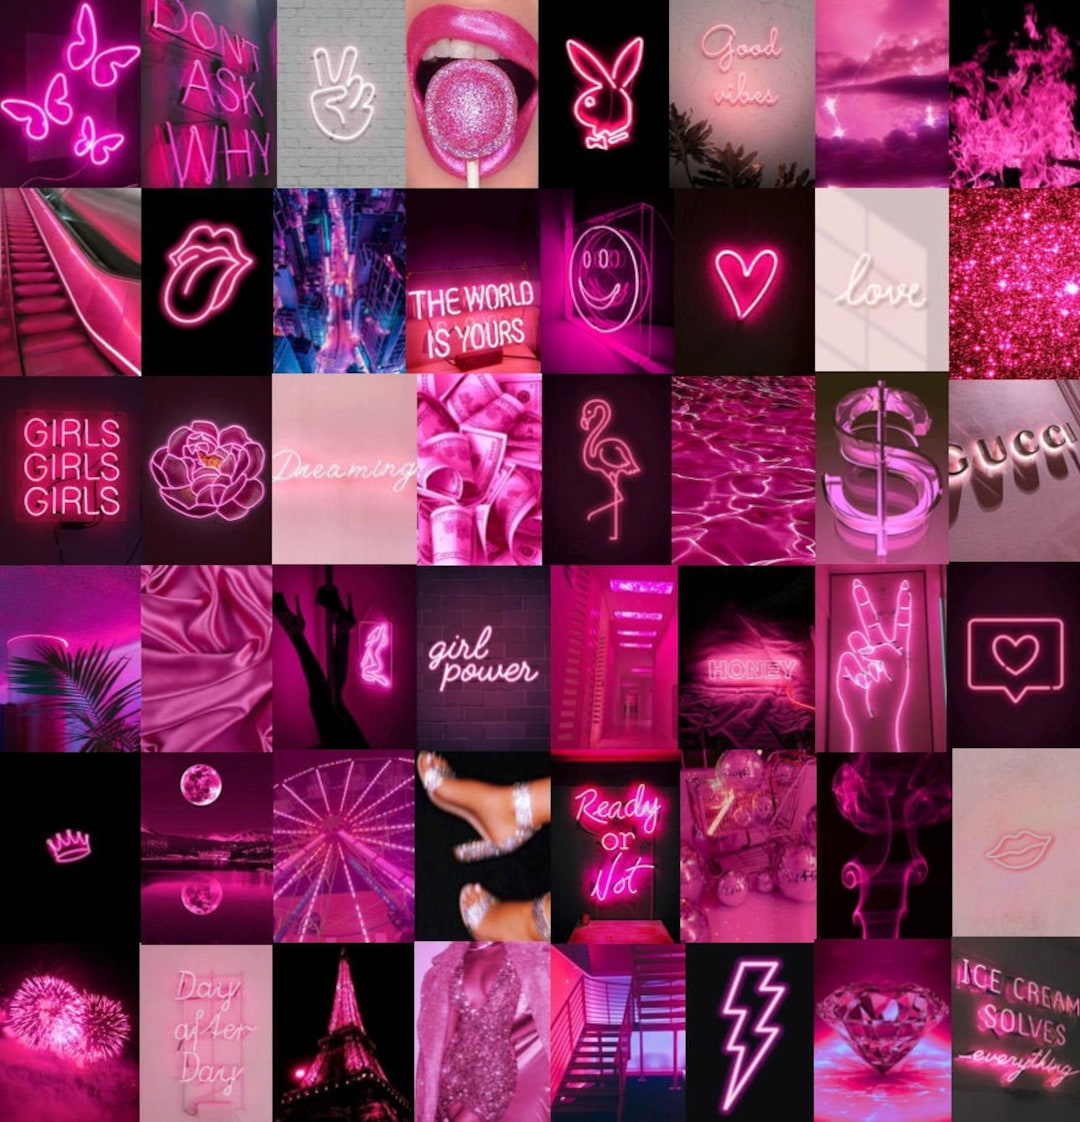 Neon Pink Aesthetic Photo Wall Collage Kit - Etsy